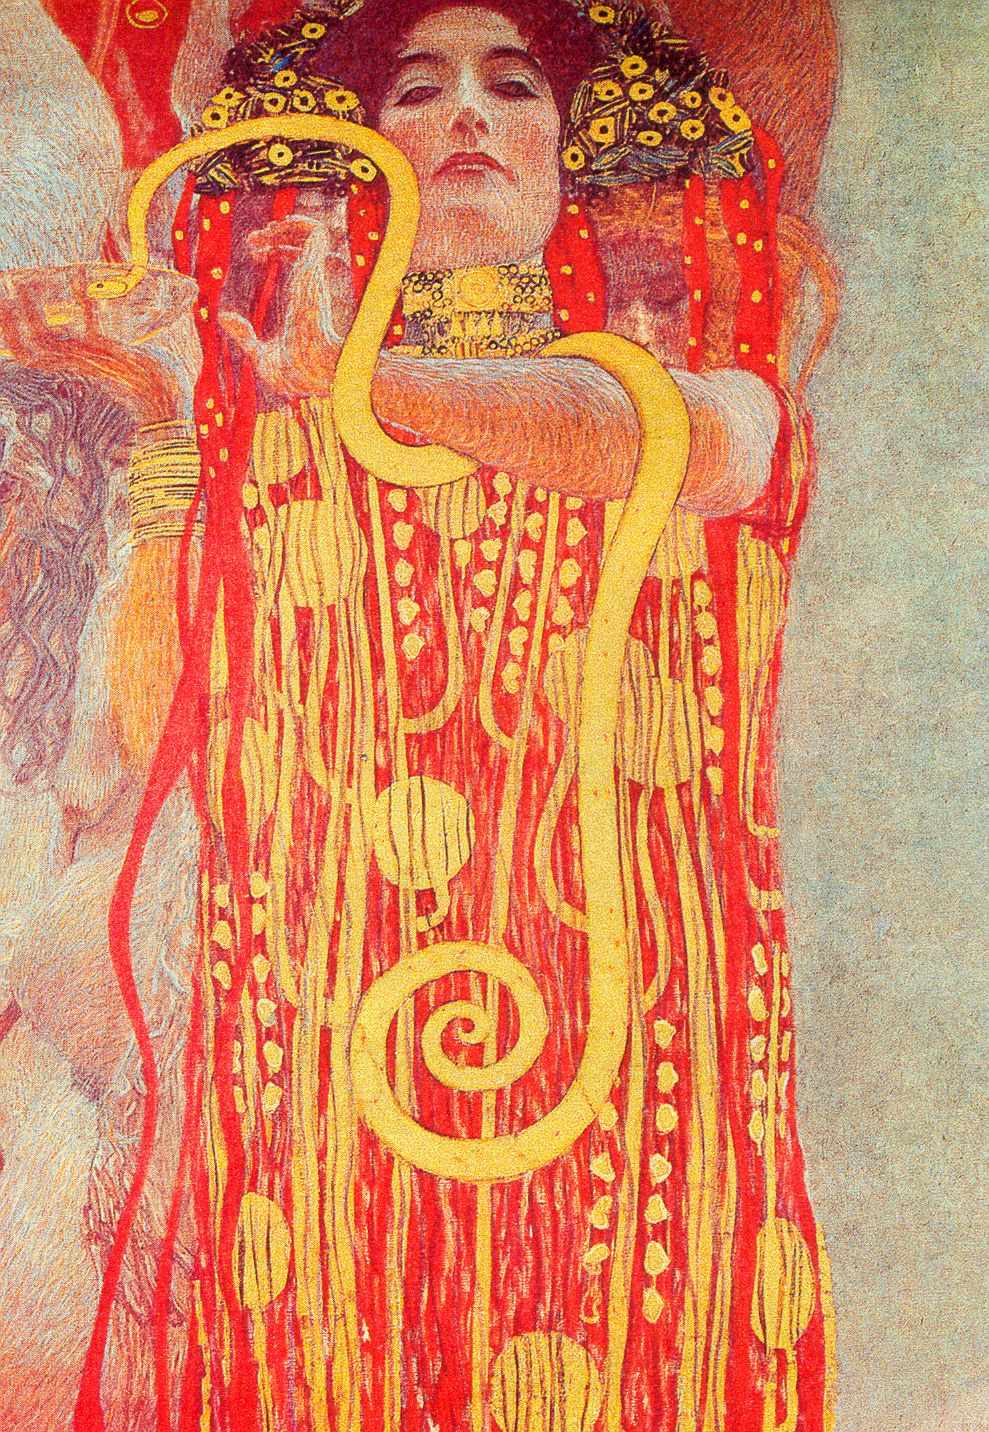 University of Vienna Ceiling Paintings (Medicine), detail showing Hygieia (1907).